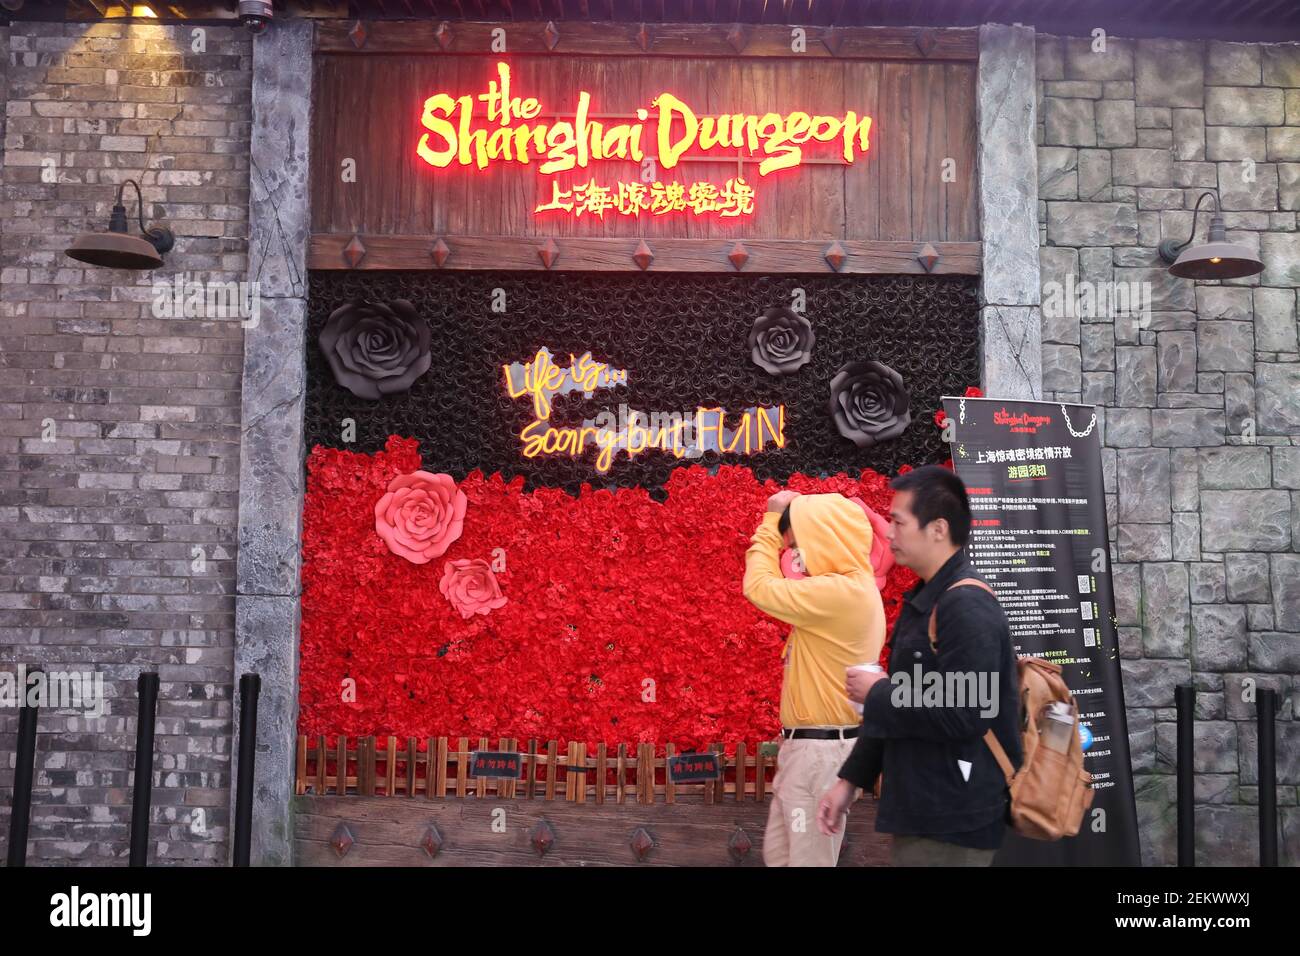 The Shanghai Dungeon is going to hold a Halloween party to celebrate ...